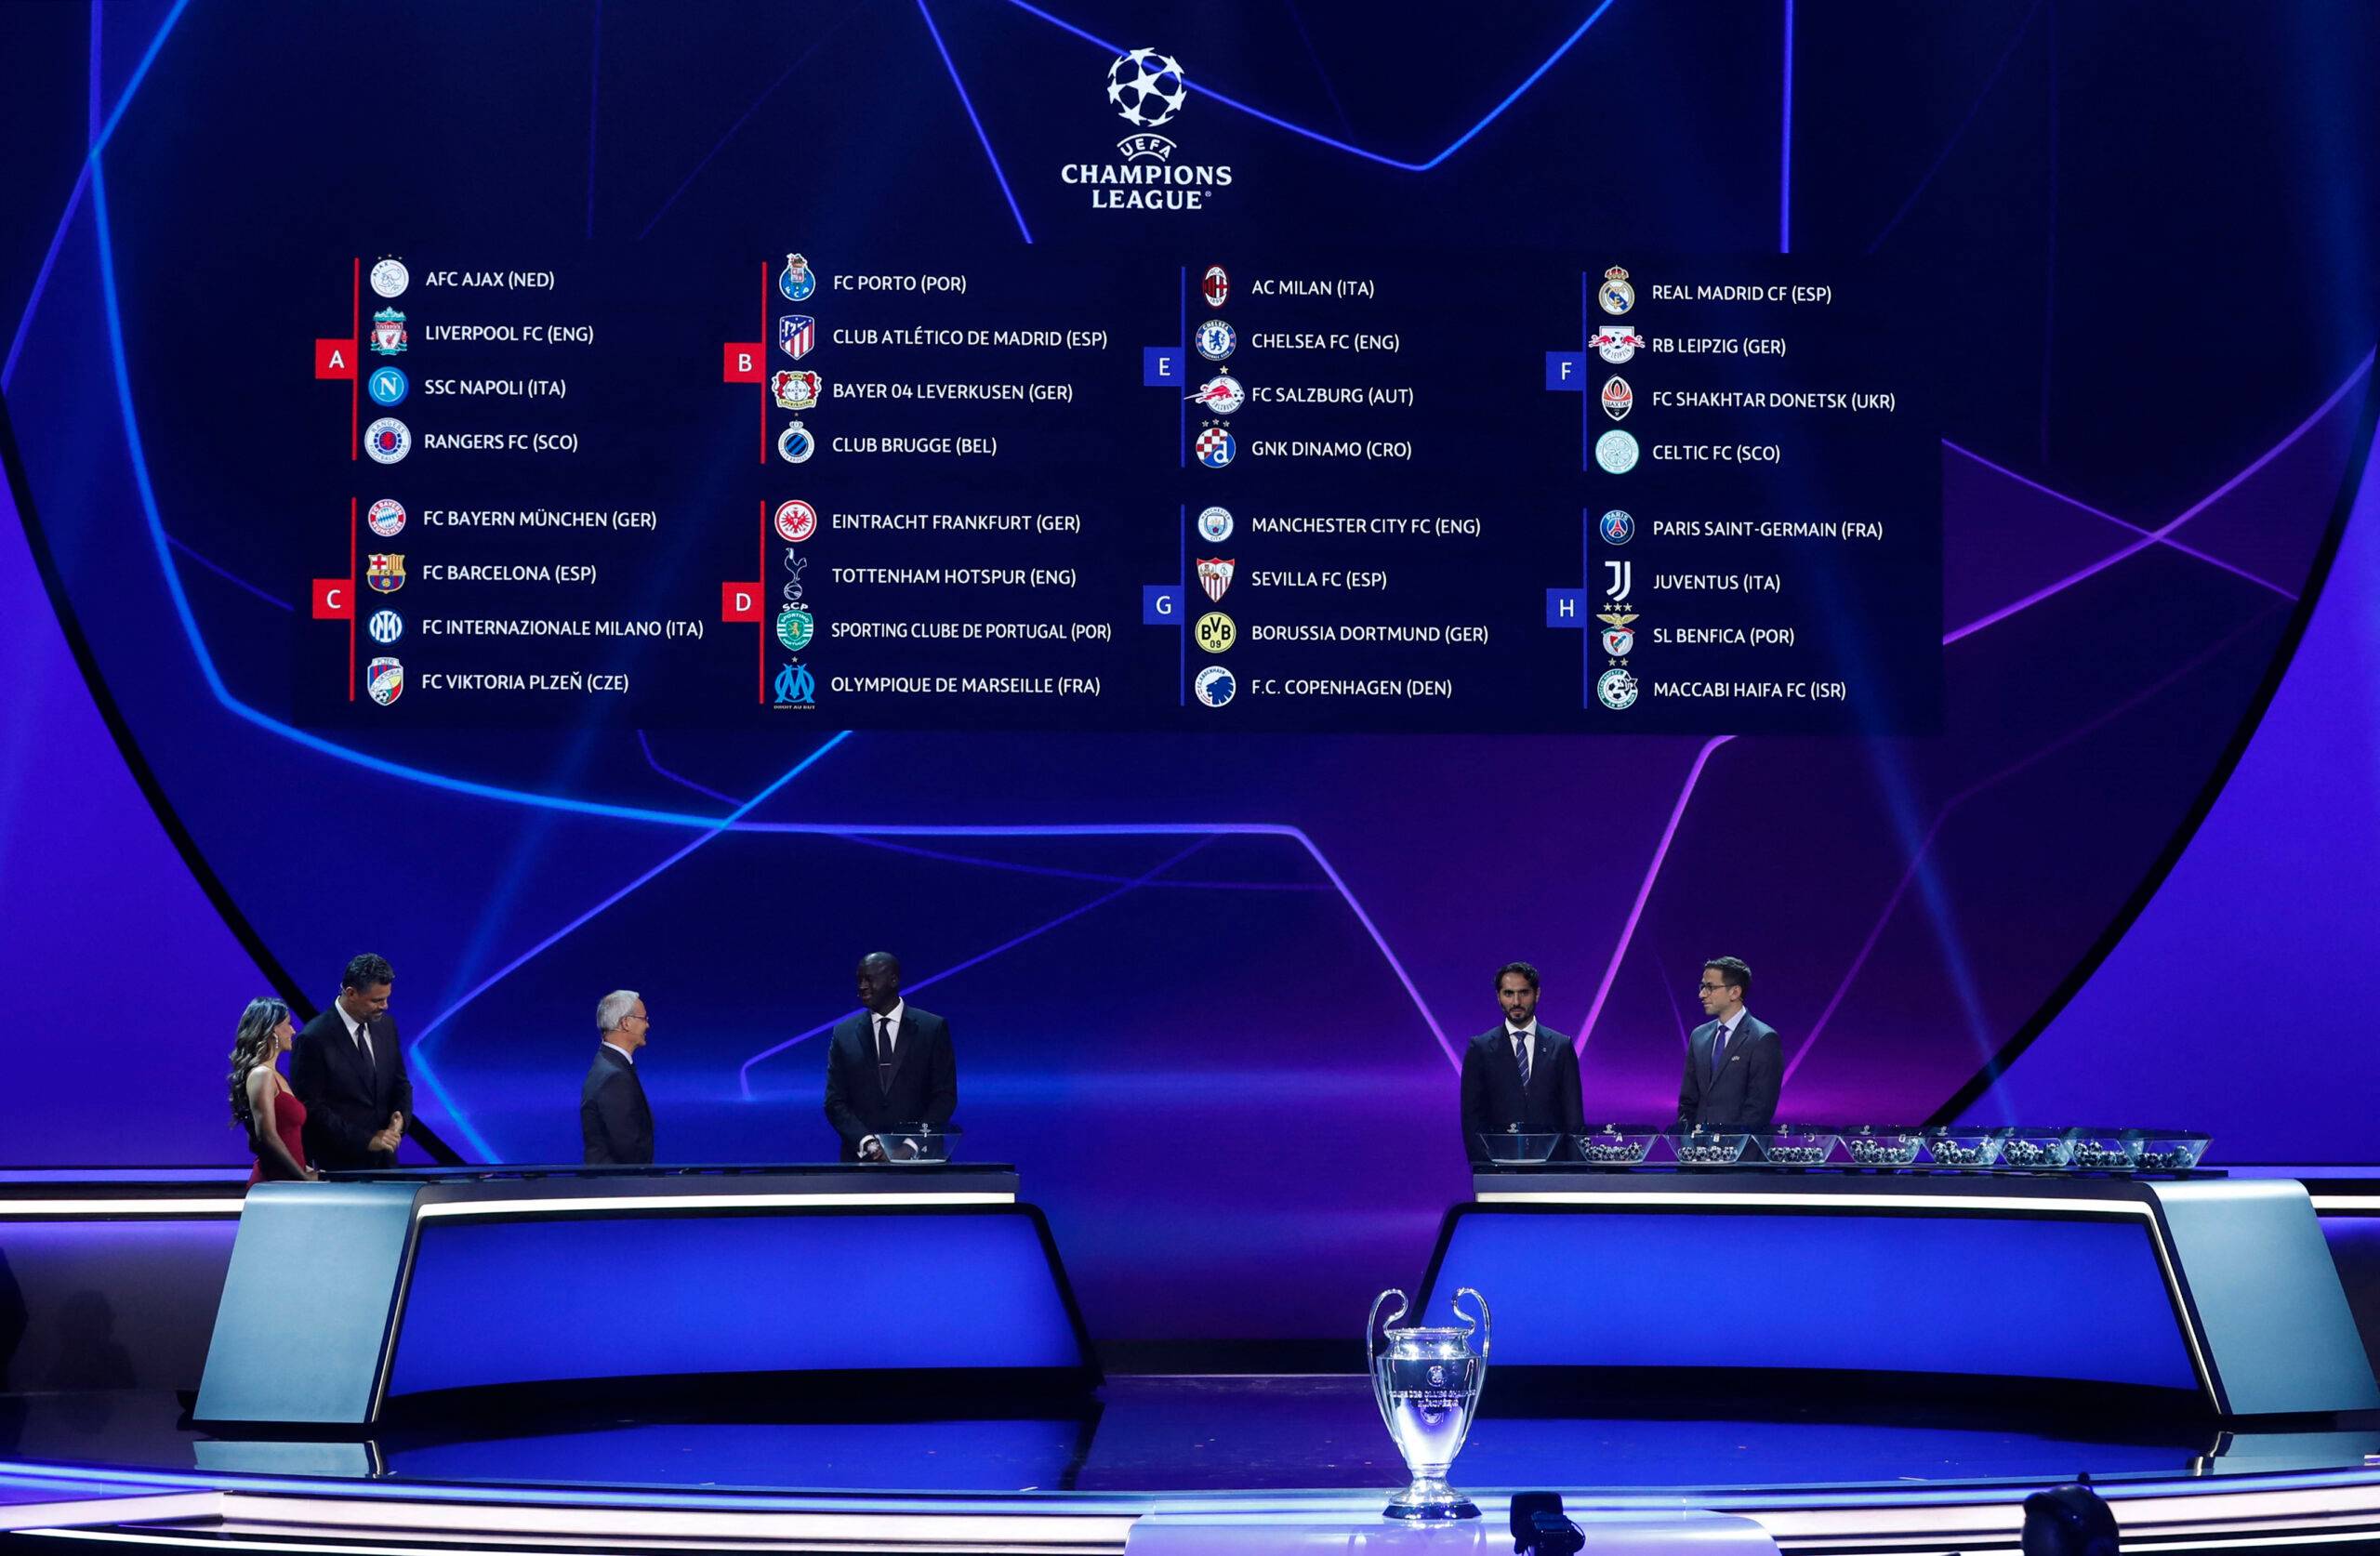 Champions League group stage draw.